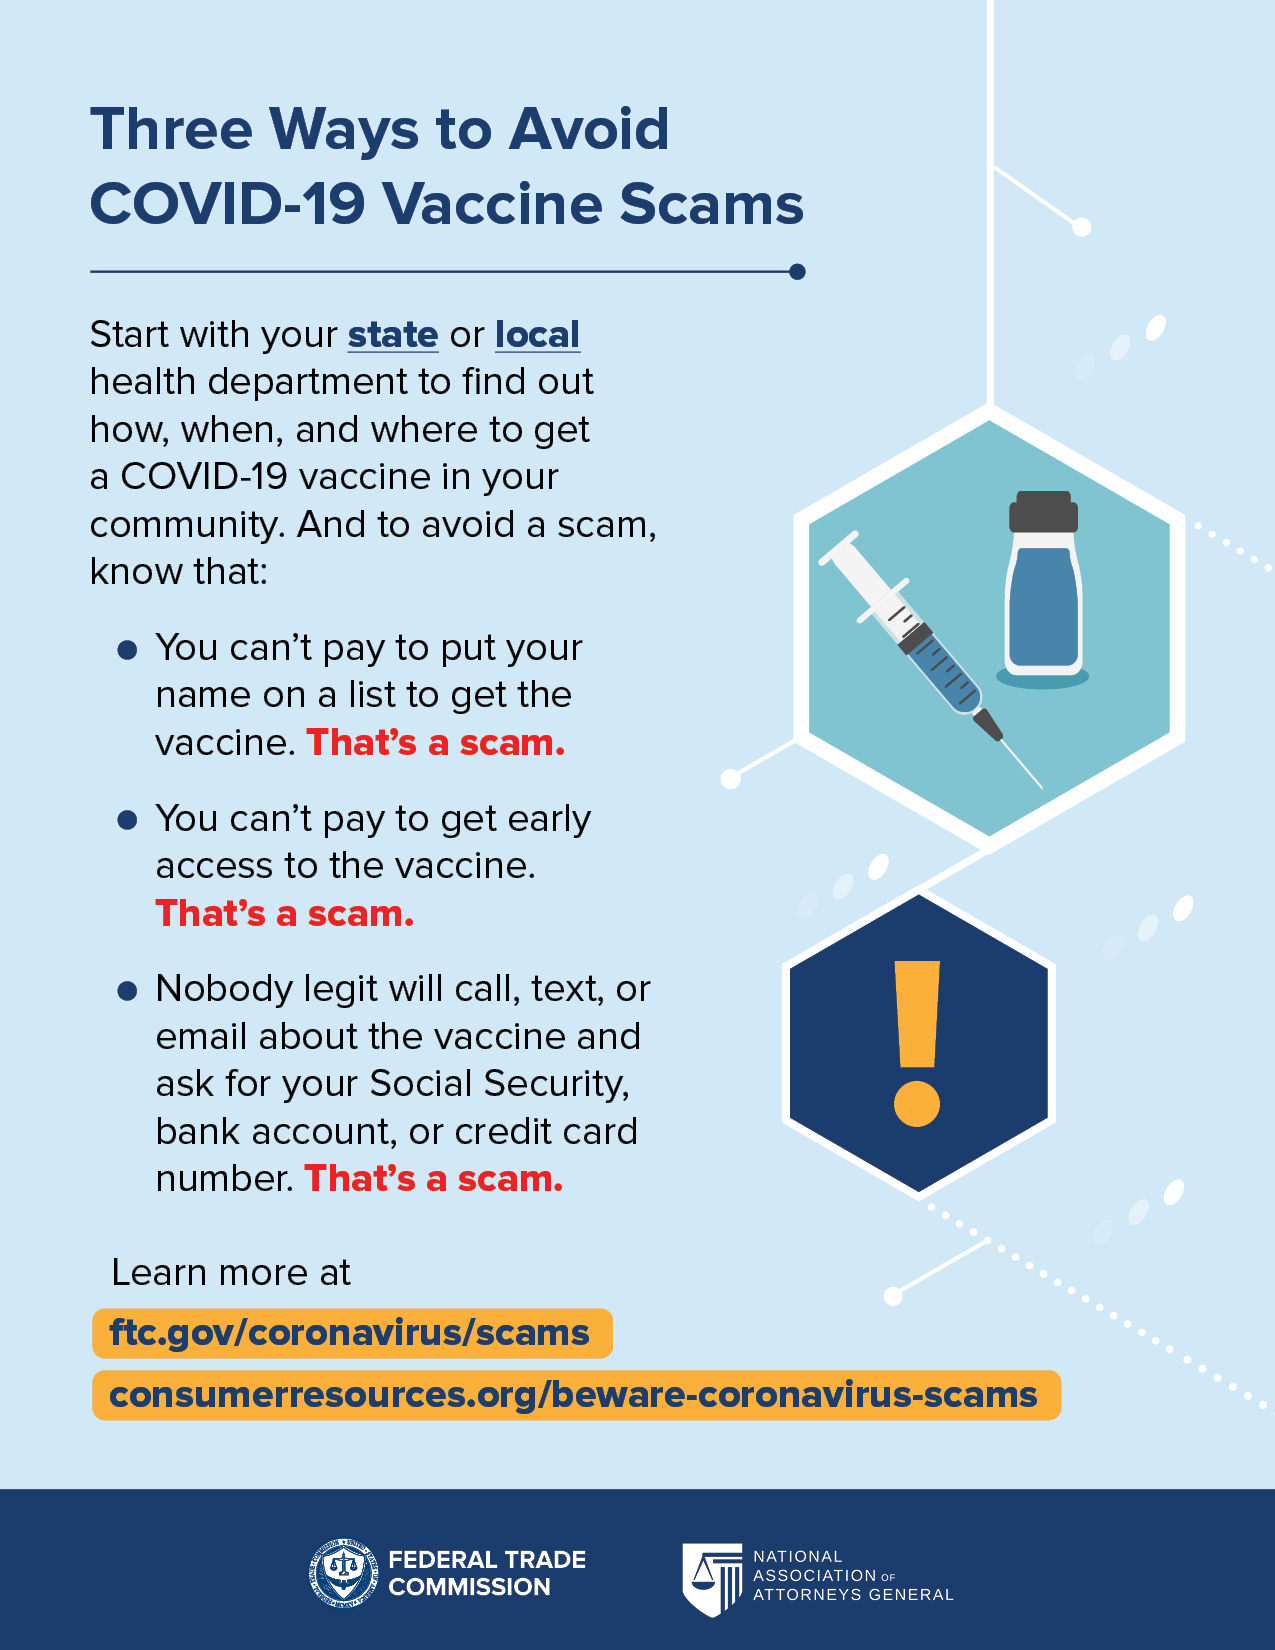 Three Ways to Avoid COVID-19 Vaccine Scams